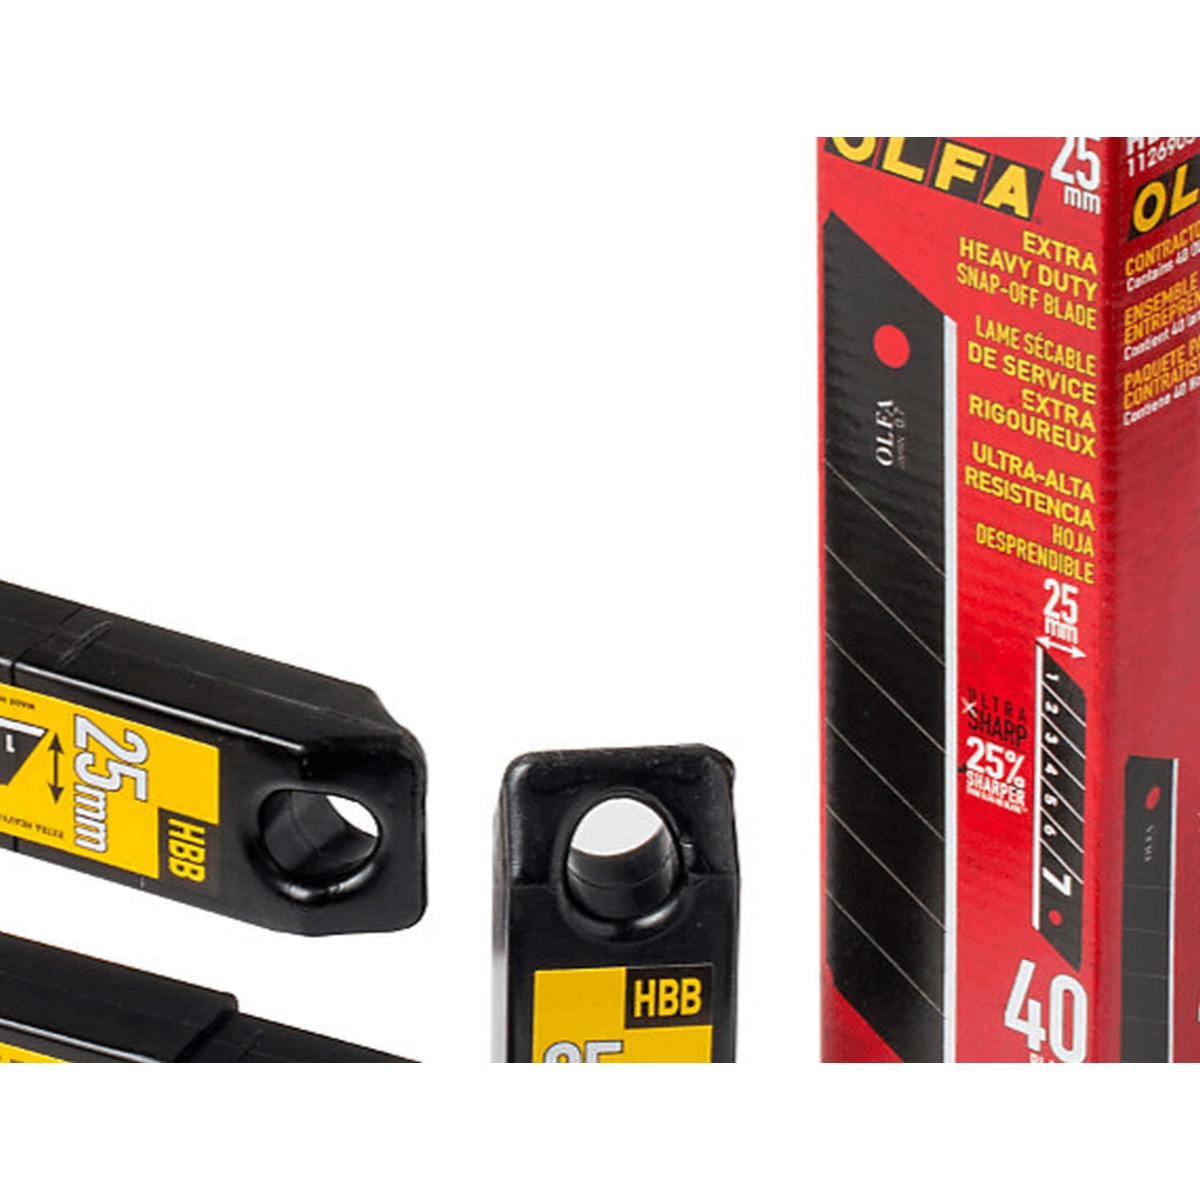 Olfa 40pk 25mm Snap-Off Blades - wise-line-tools